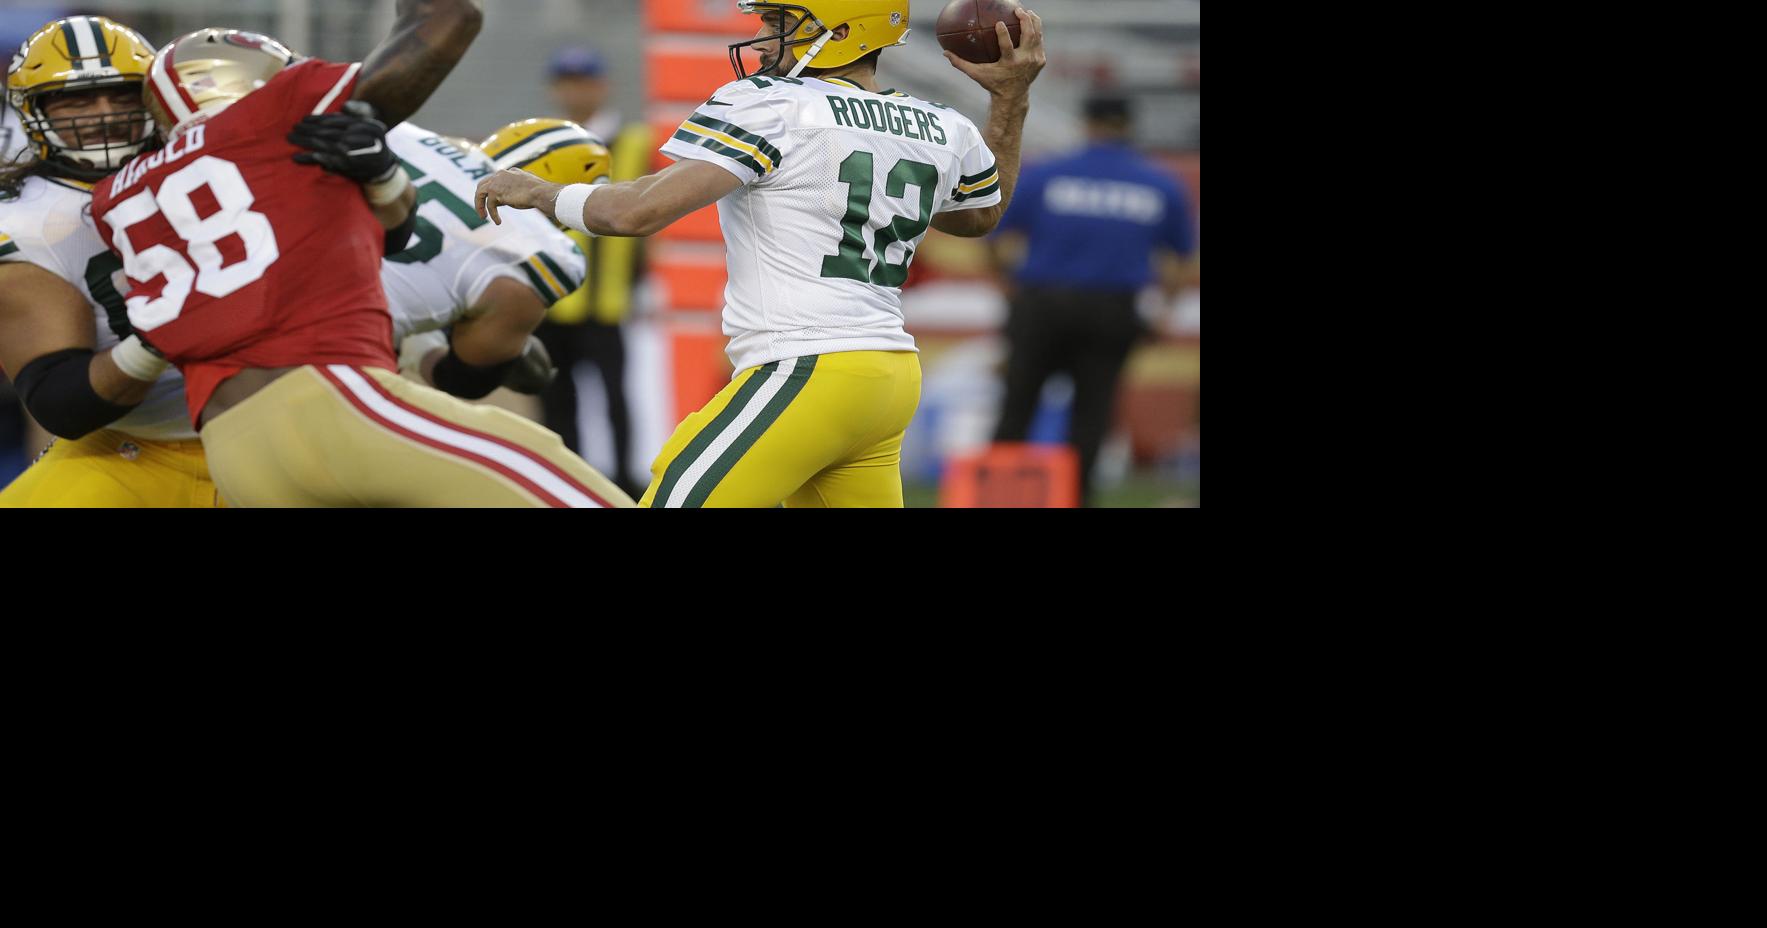 Aaron Rodgers throws a TD pass in his brief preseason debut as